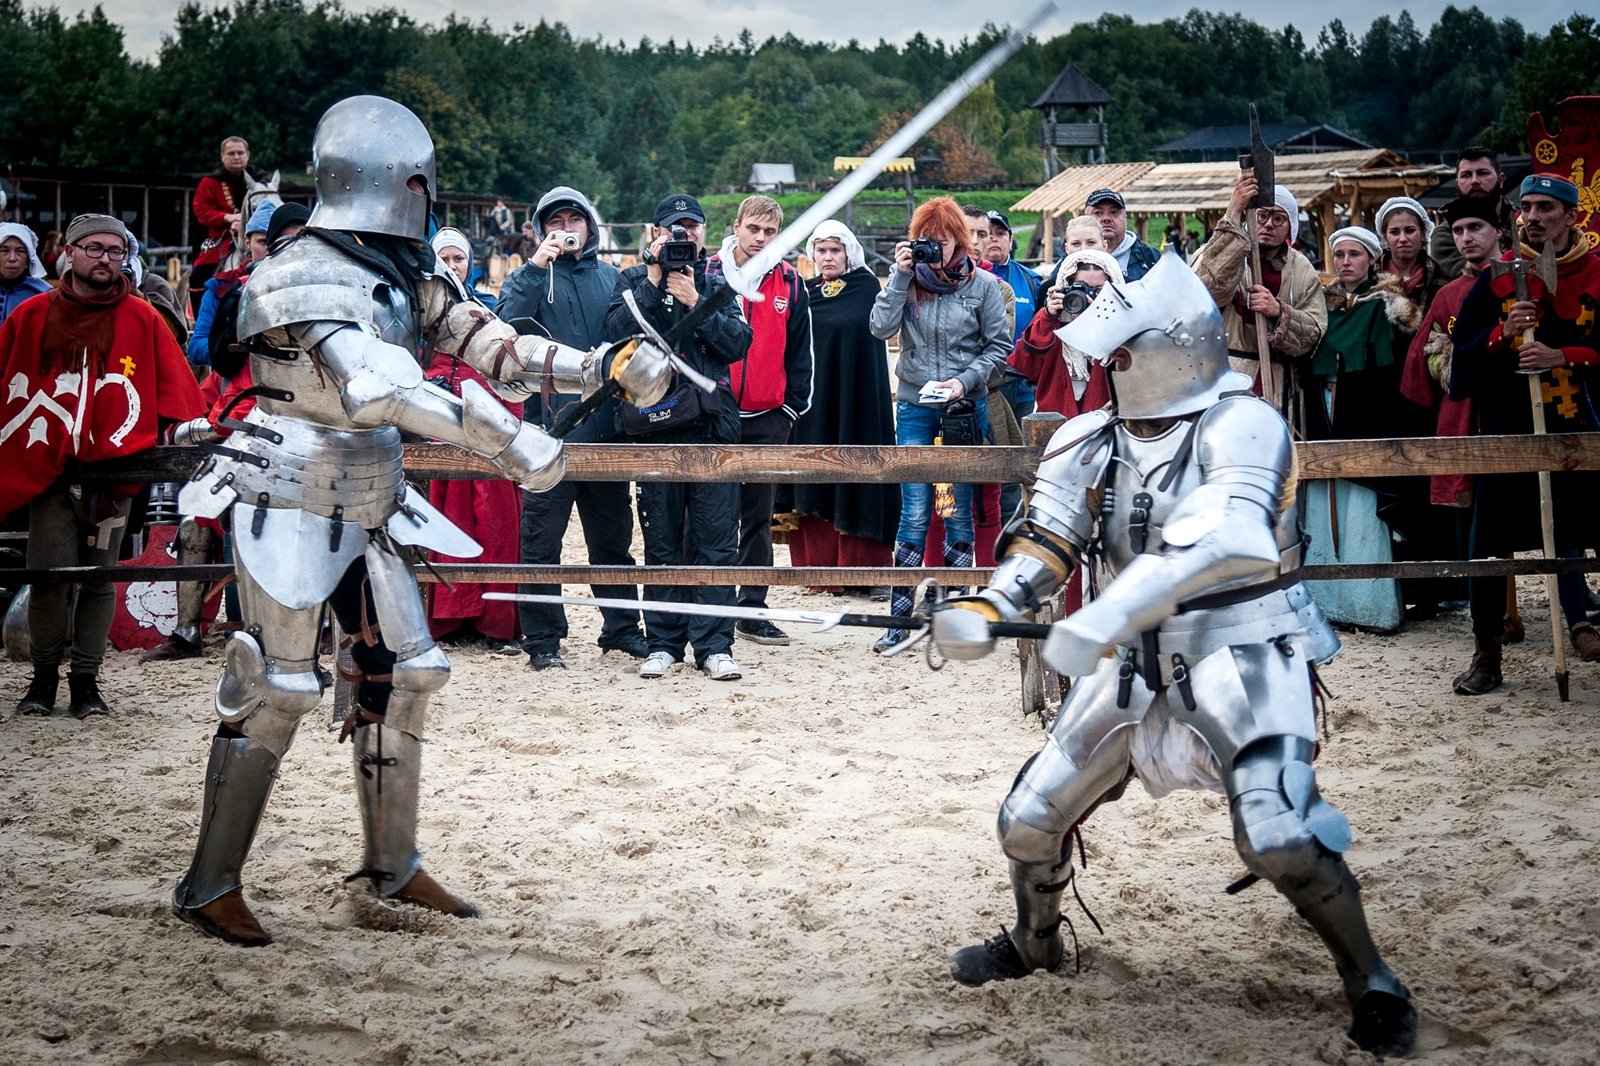 How to see the joust in Kiev